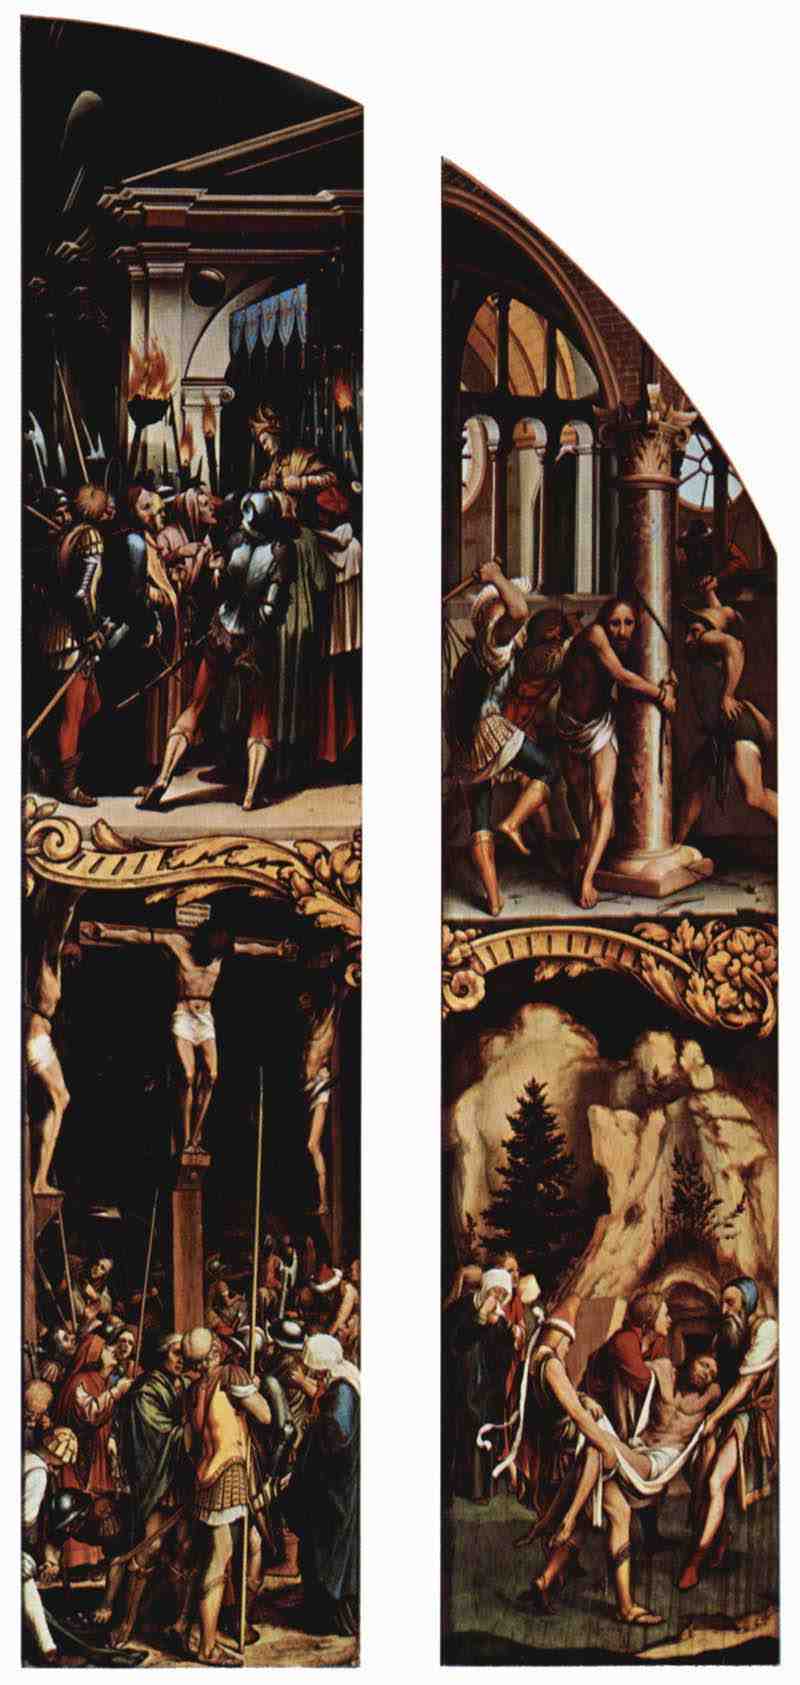 Passion altar, right outer panels Scenes: Burial and Flagellation of Christ, right inner panel, right internal scenes: Crucifixion and Christ before Pilate. Hans Holbein the Younger